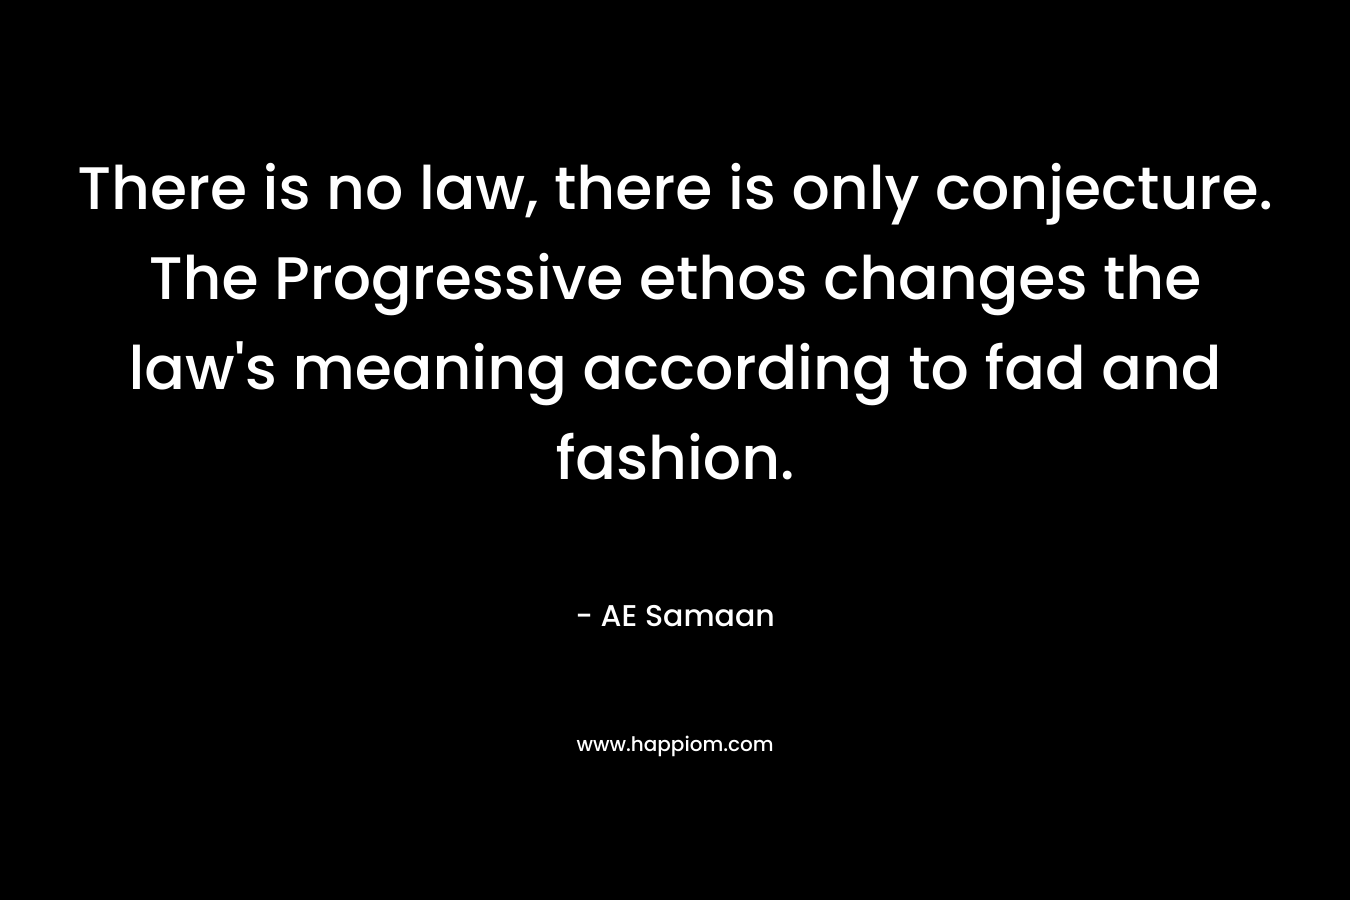 There is no law, there is only conjecture. The Progressive ethos changes the law's meaning according to fad and fashion.